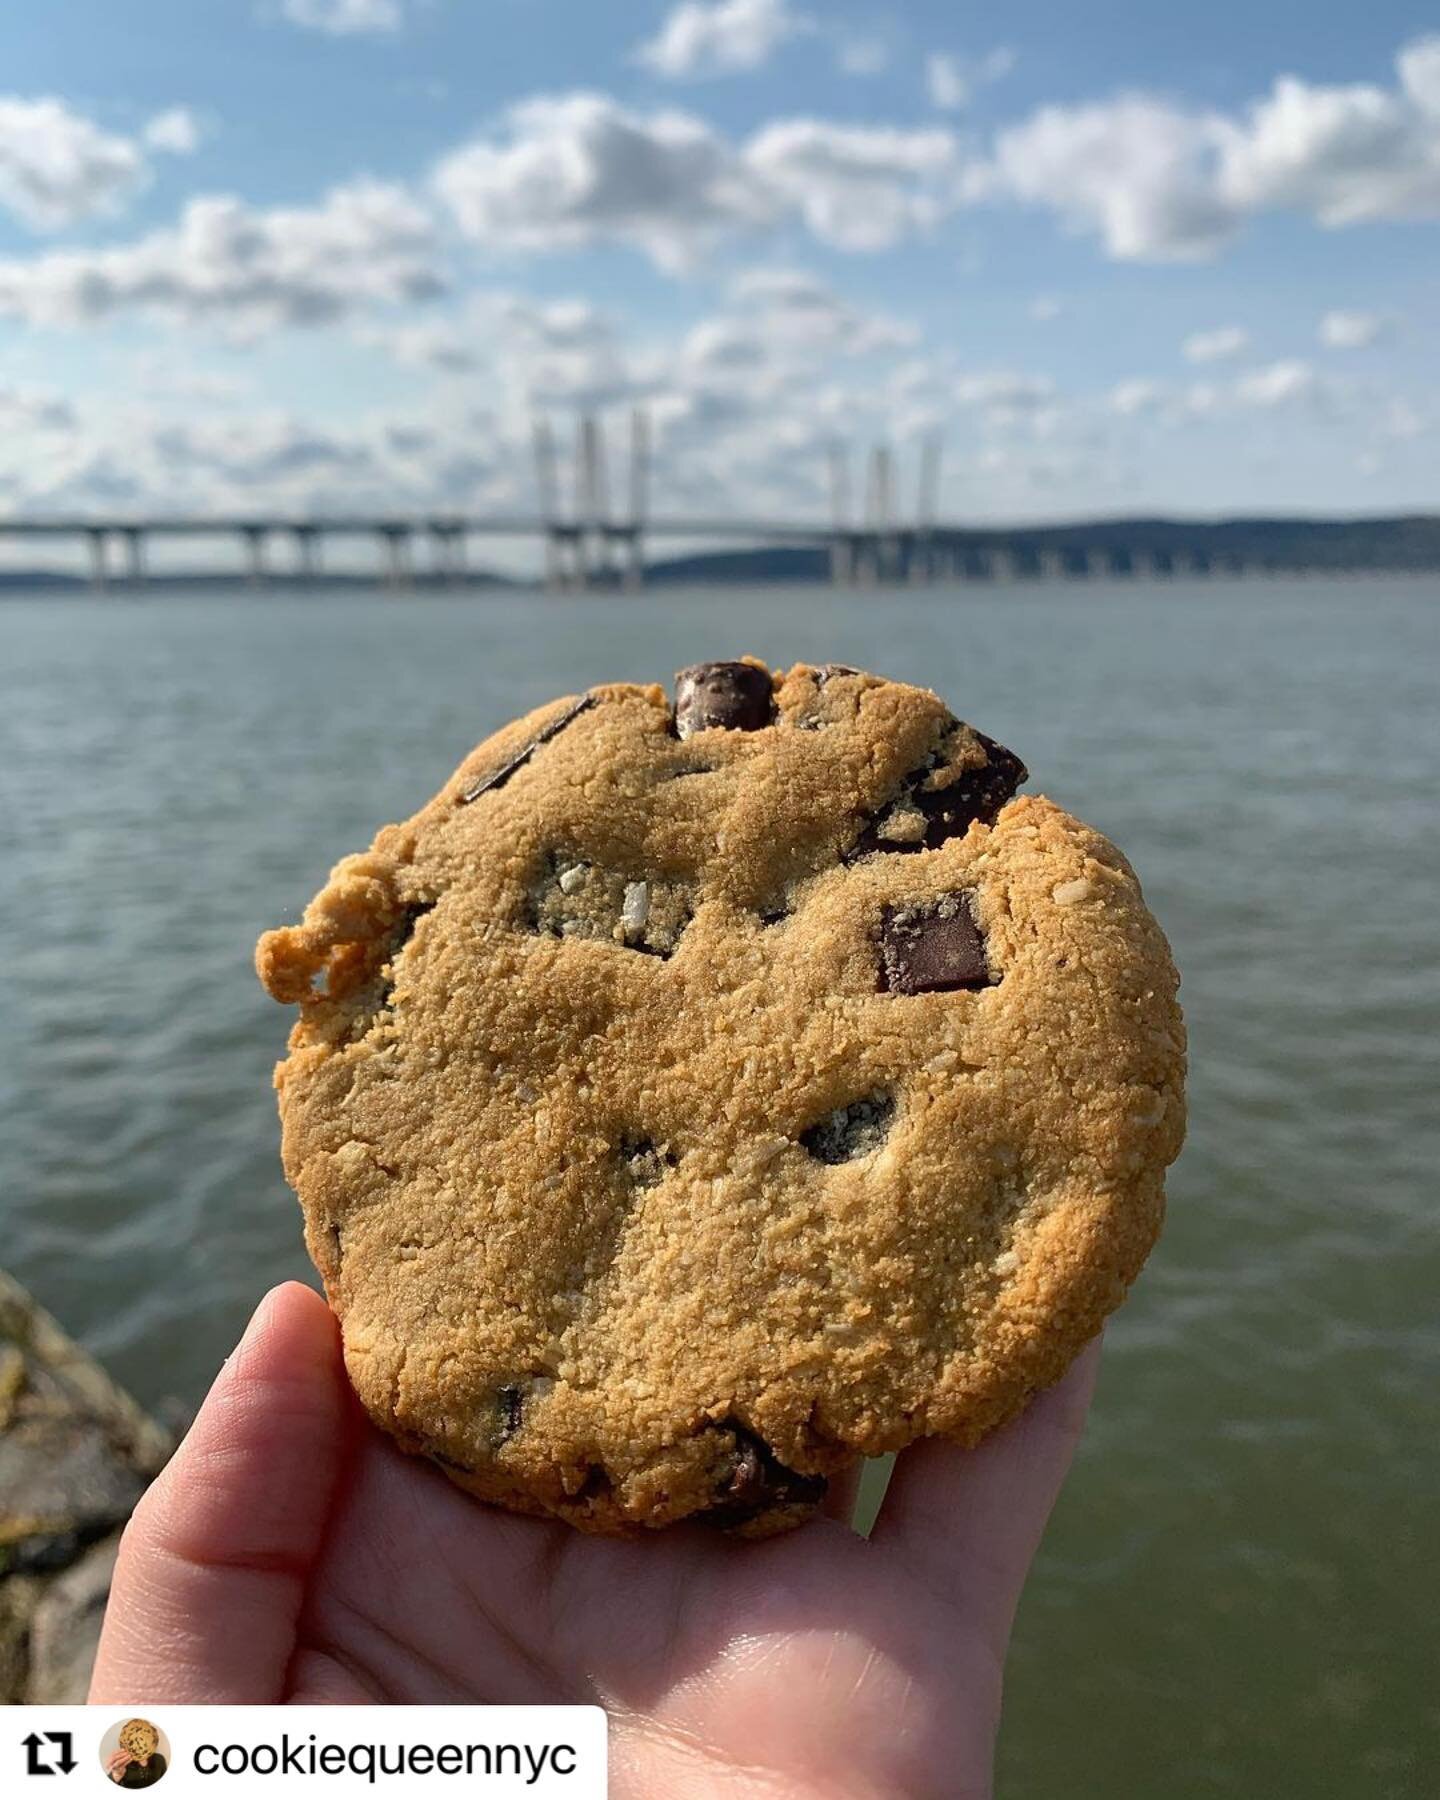 Our sweet treats are baked fresh daily and perfect to take on the Westchester RiverWalk! Come get our vegan and gluten free chocolate chip cookies and so much more right in the heart of Tarrytown. 🍪 

Great photo, @cookiequeennyc thank you for stopp